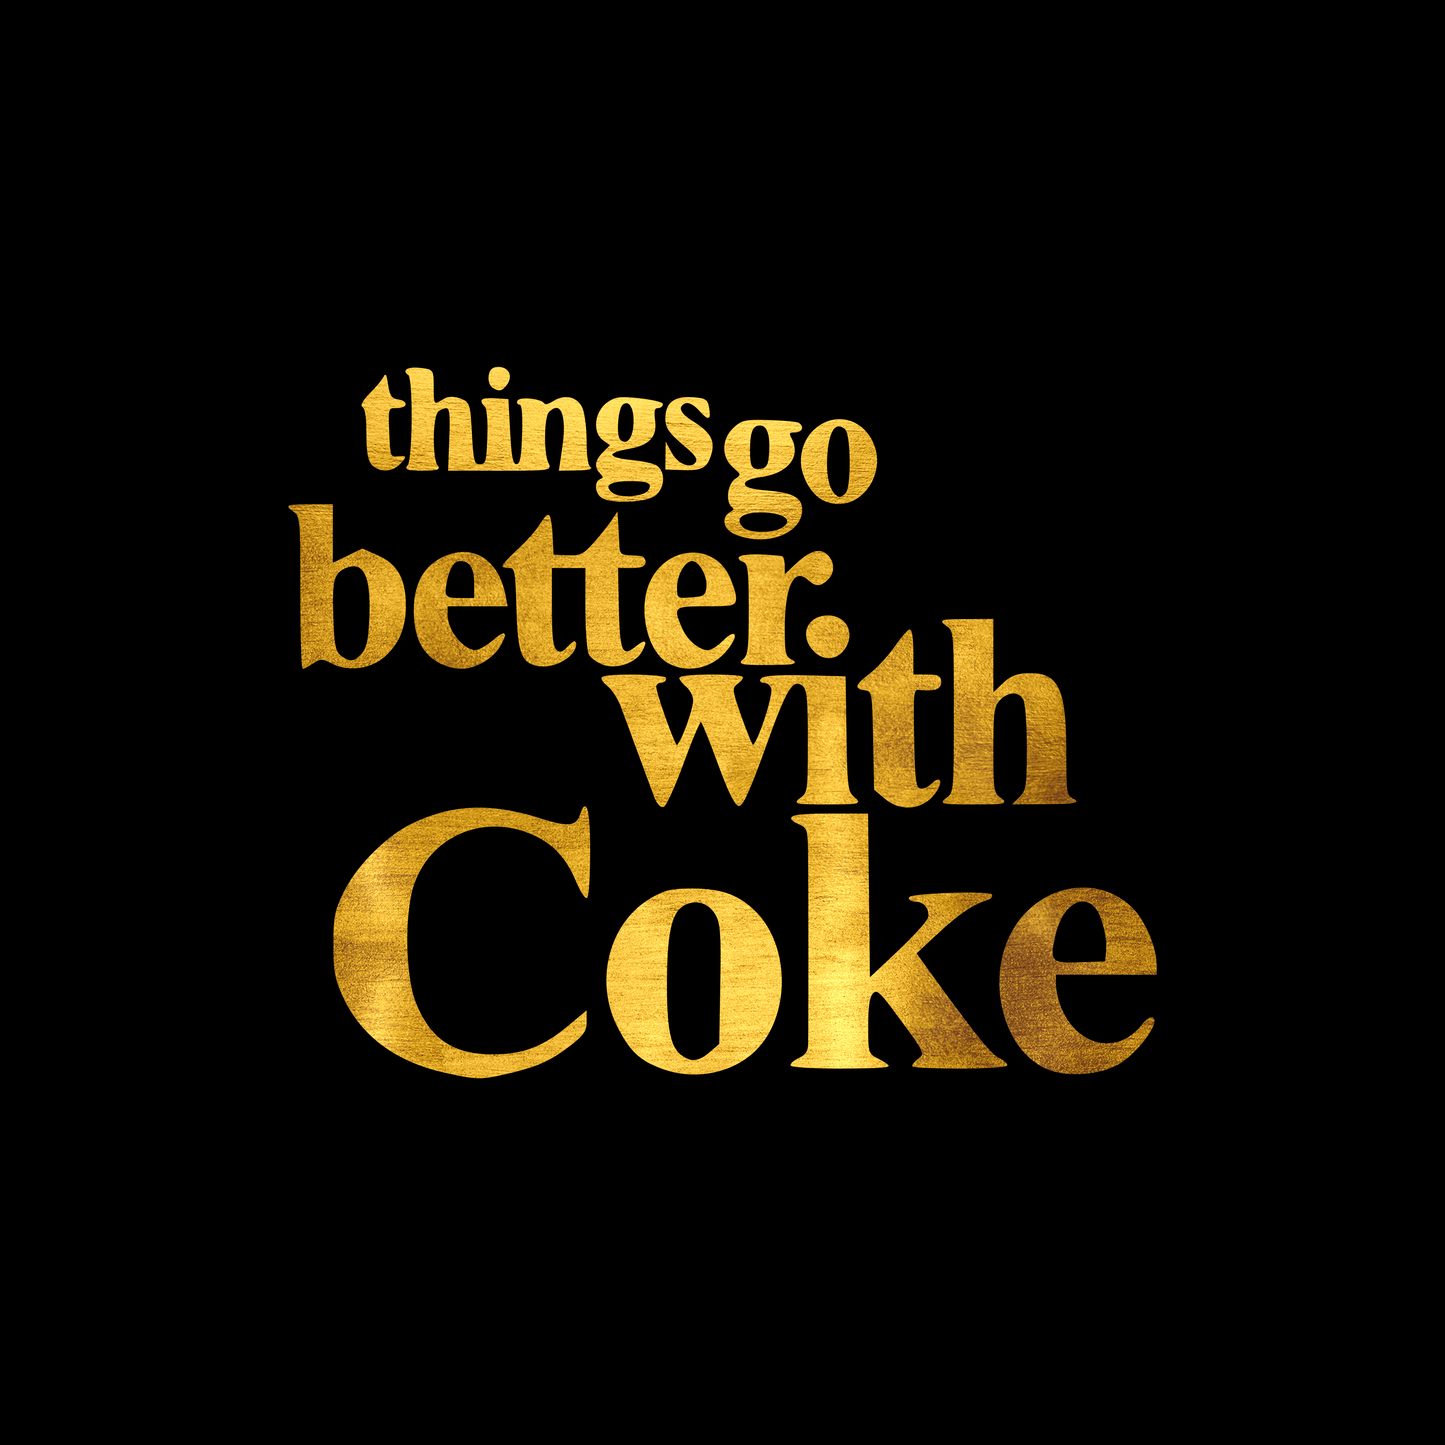 Things go better with coke sticker decal